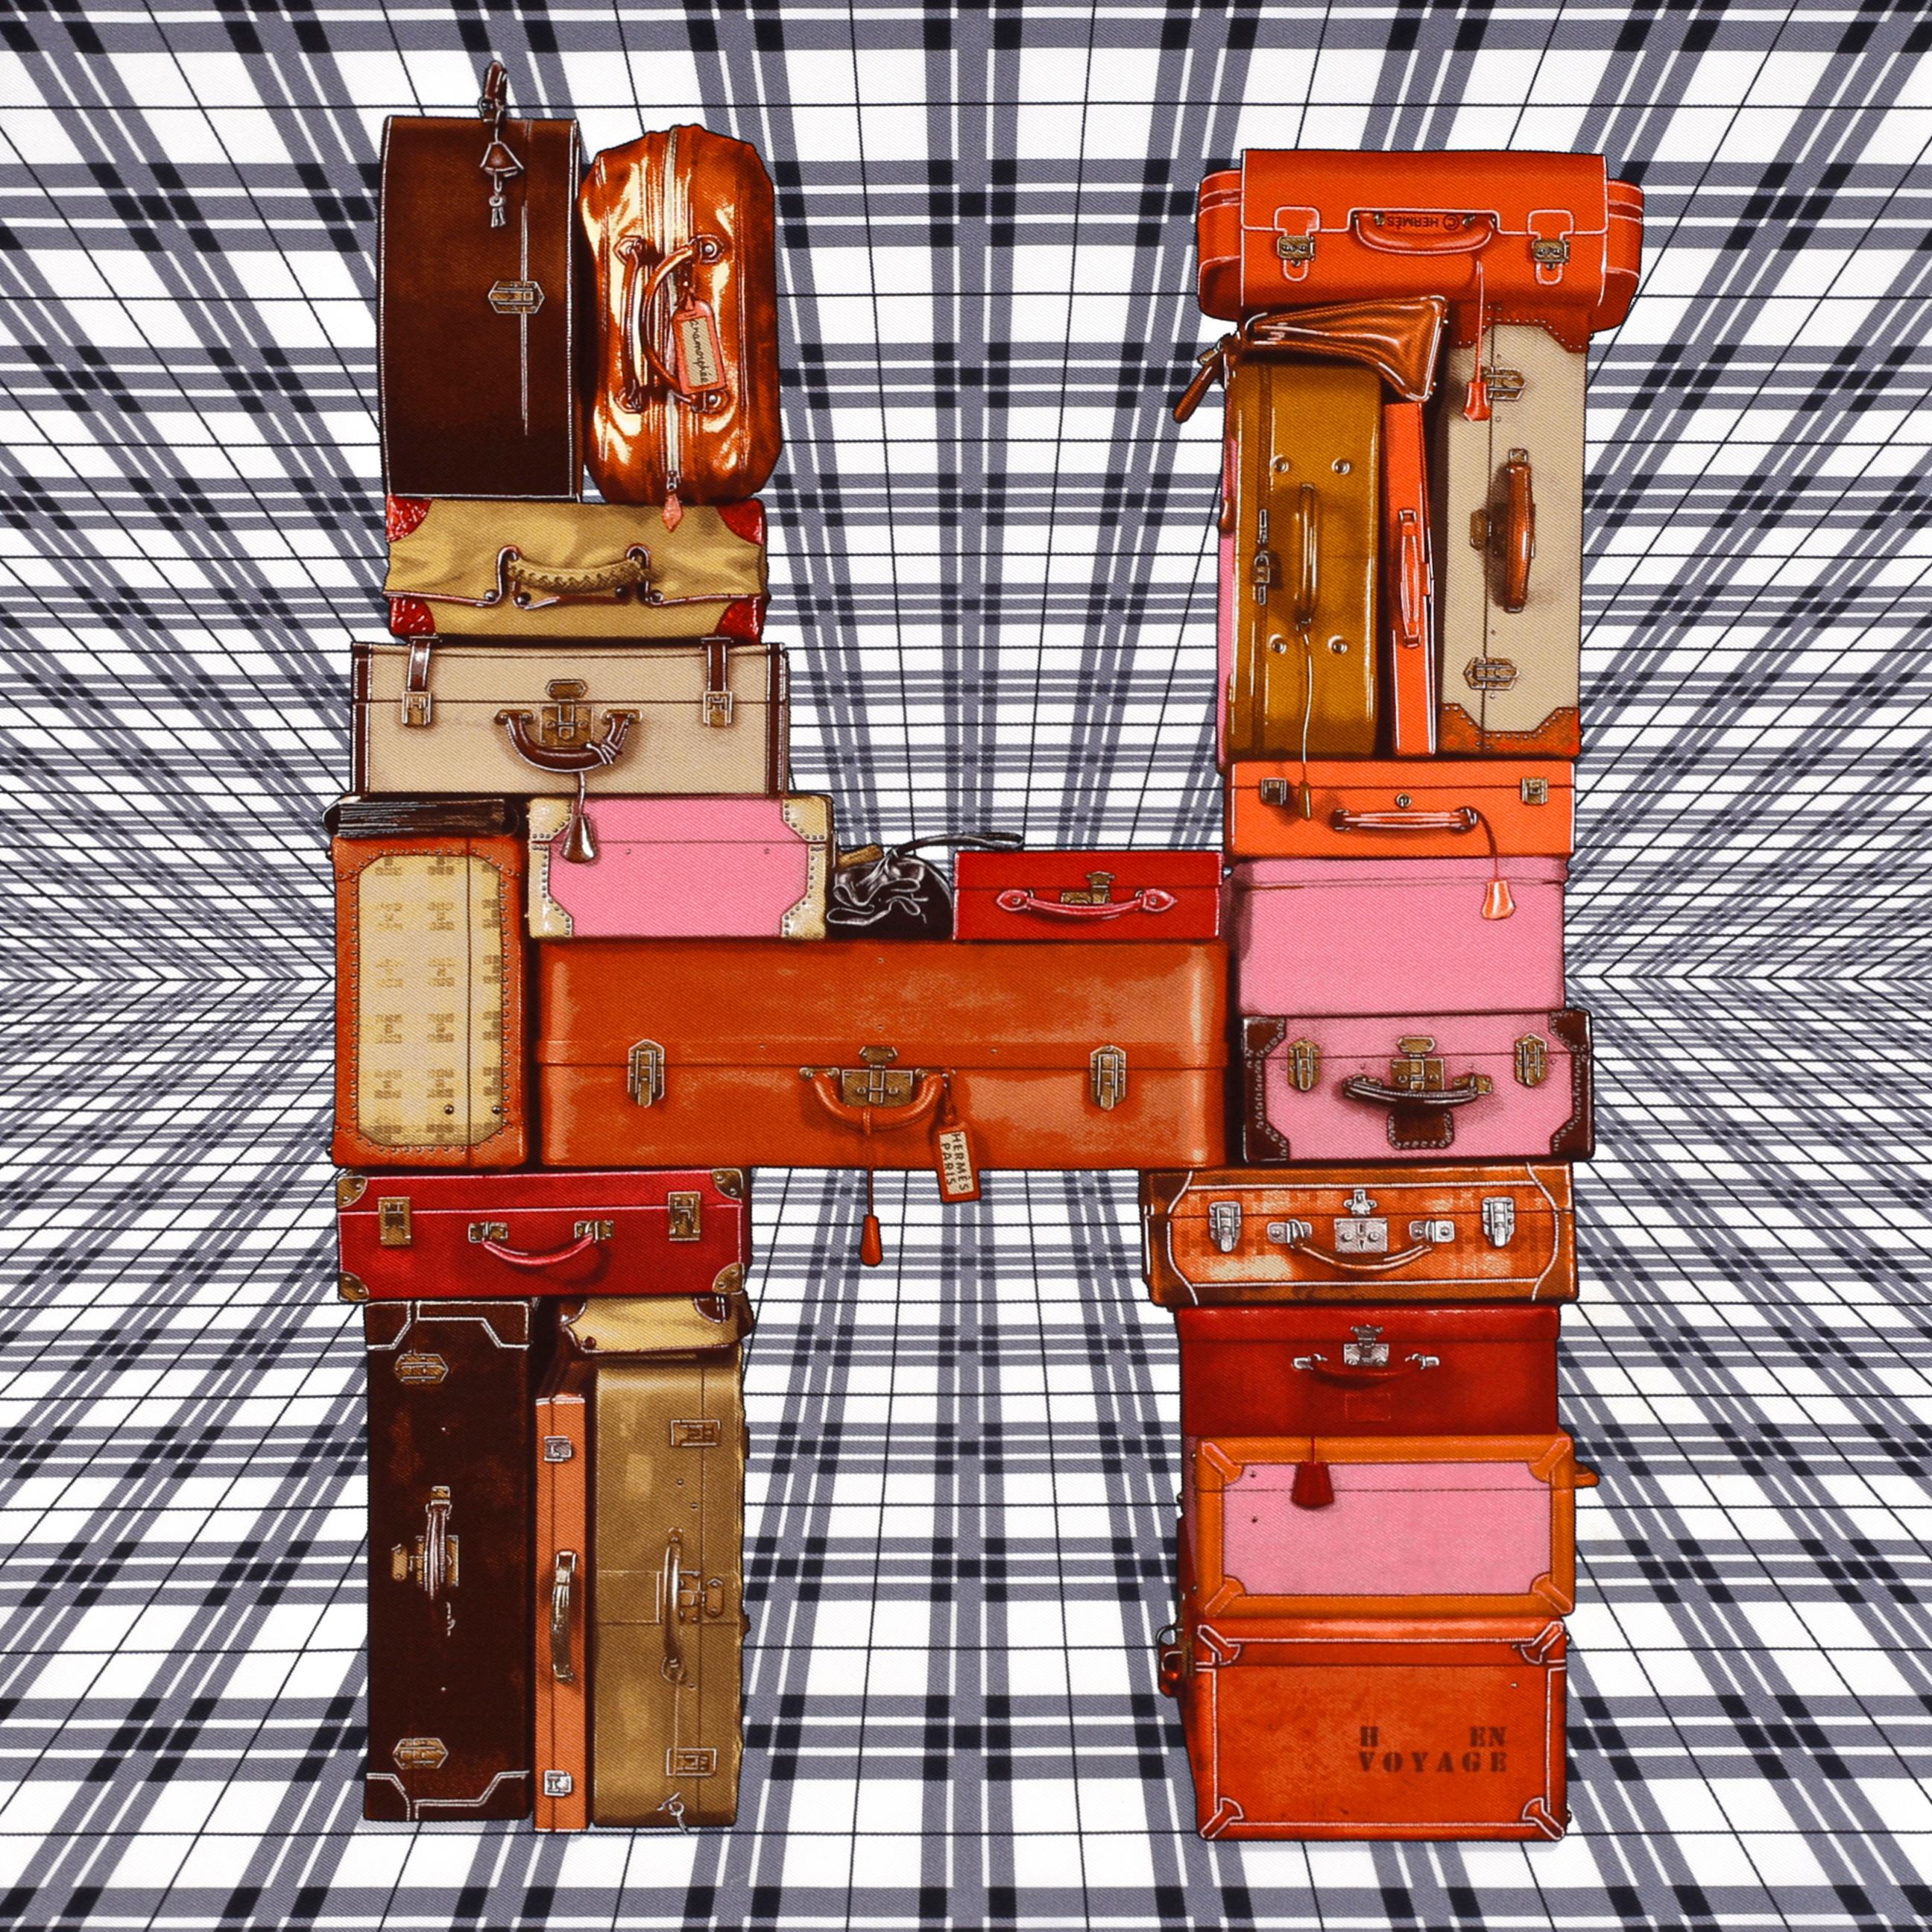 Circa: 2009. Author: Anamorphée. Square shaped scarf / pocket square. Features suitcases/luggage of varied sizes stacked into an iconic 'H' for Hermes. Geometric lines placed in background to render optical illusion and give prominence to H-shape in